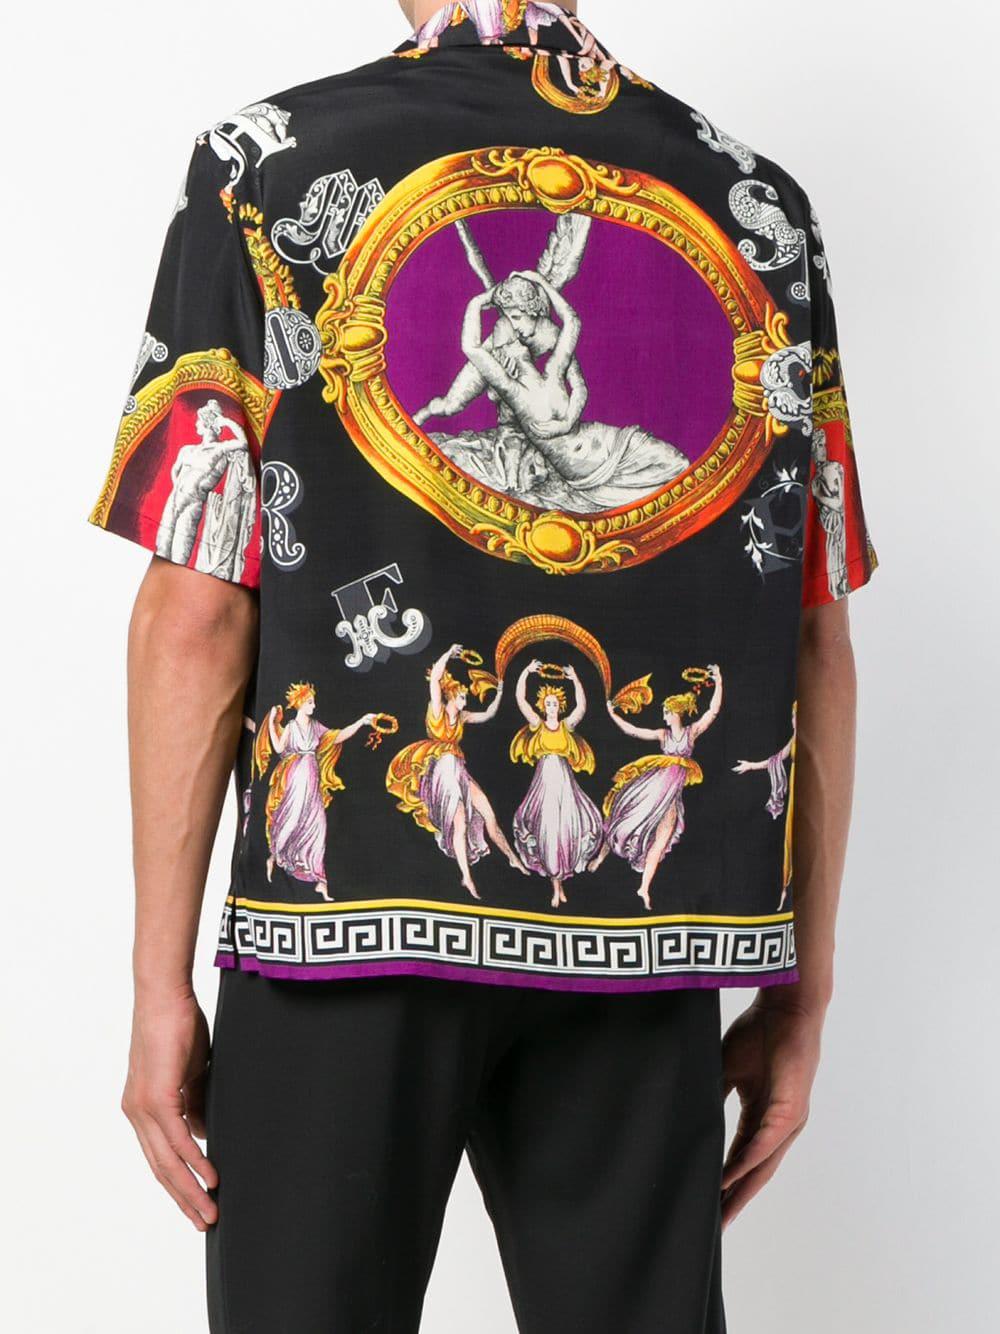 Versace Cupid And Psyche Printed Shirt in Black for Men - Lyst